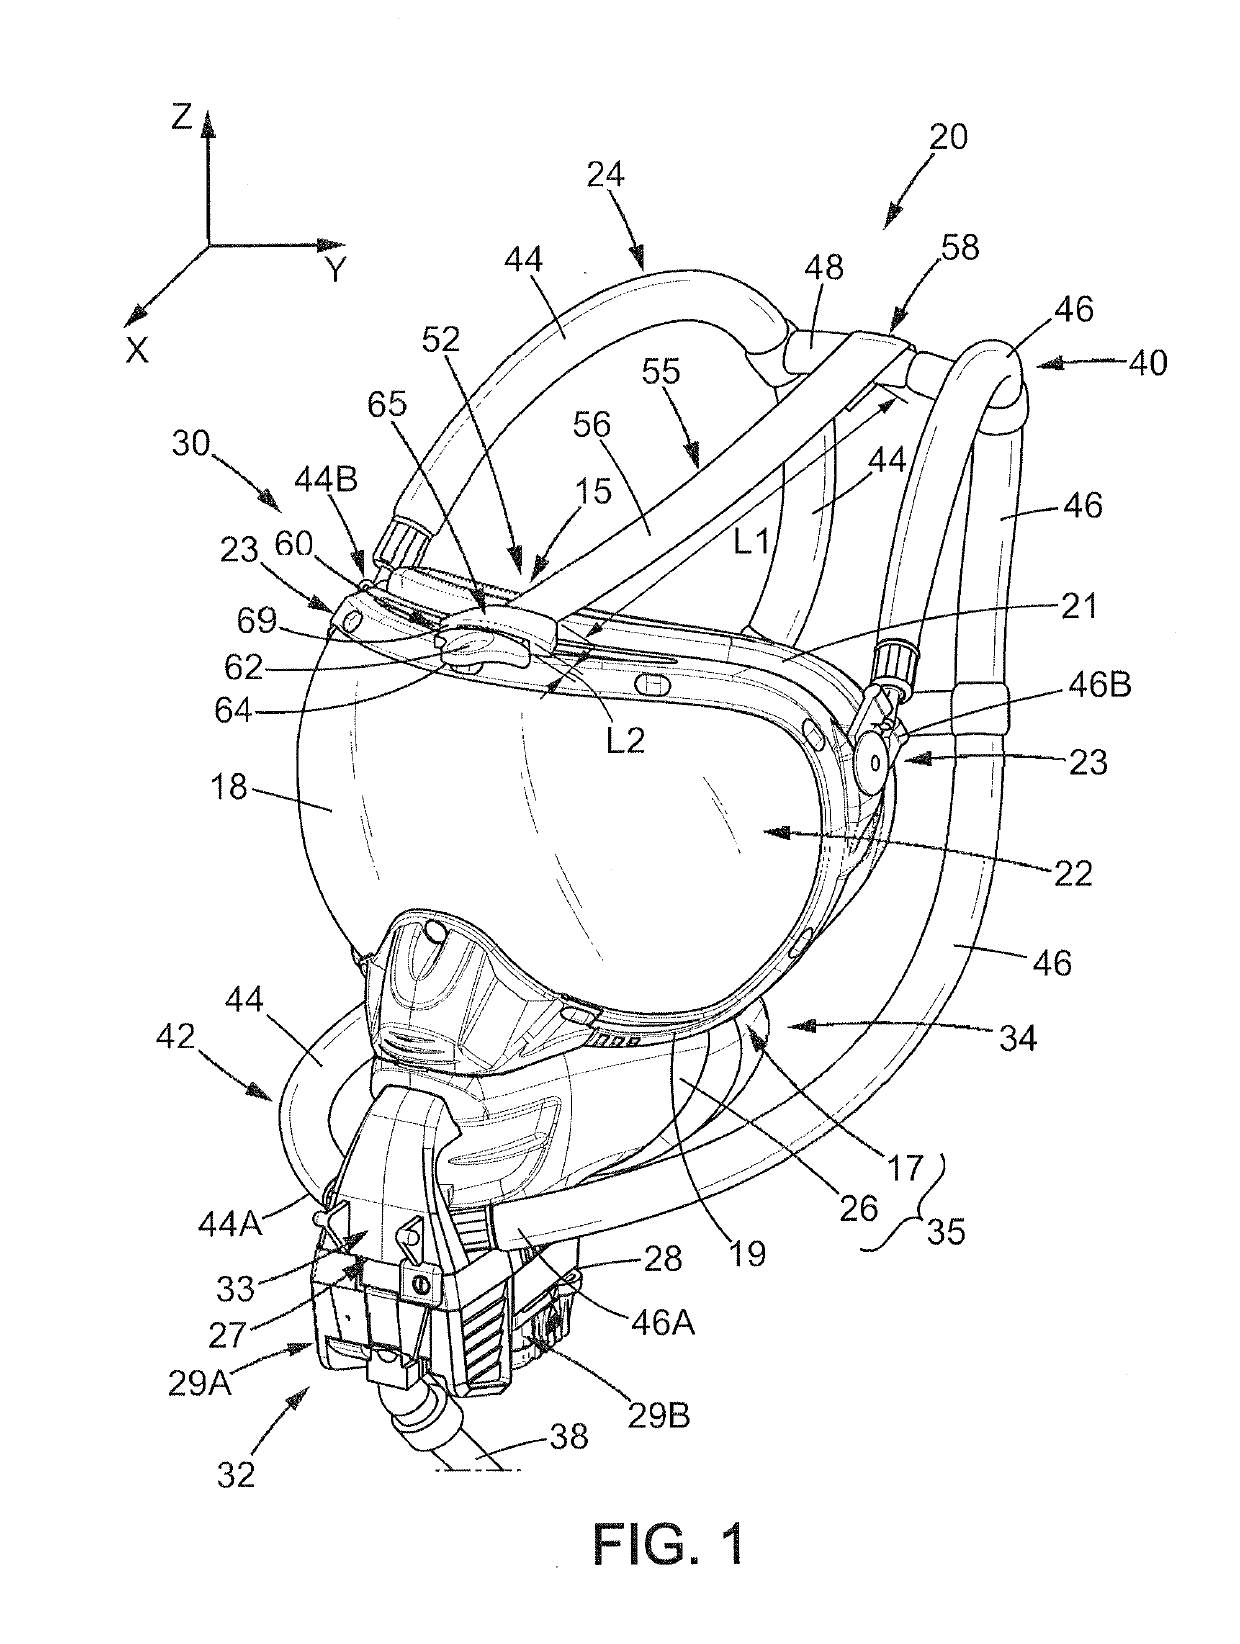 Breathing mask for aircraft and method for putting a breathing mask in folded position for storage in a storage unit